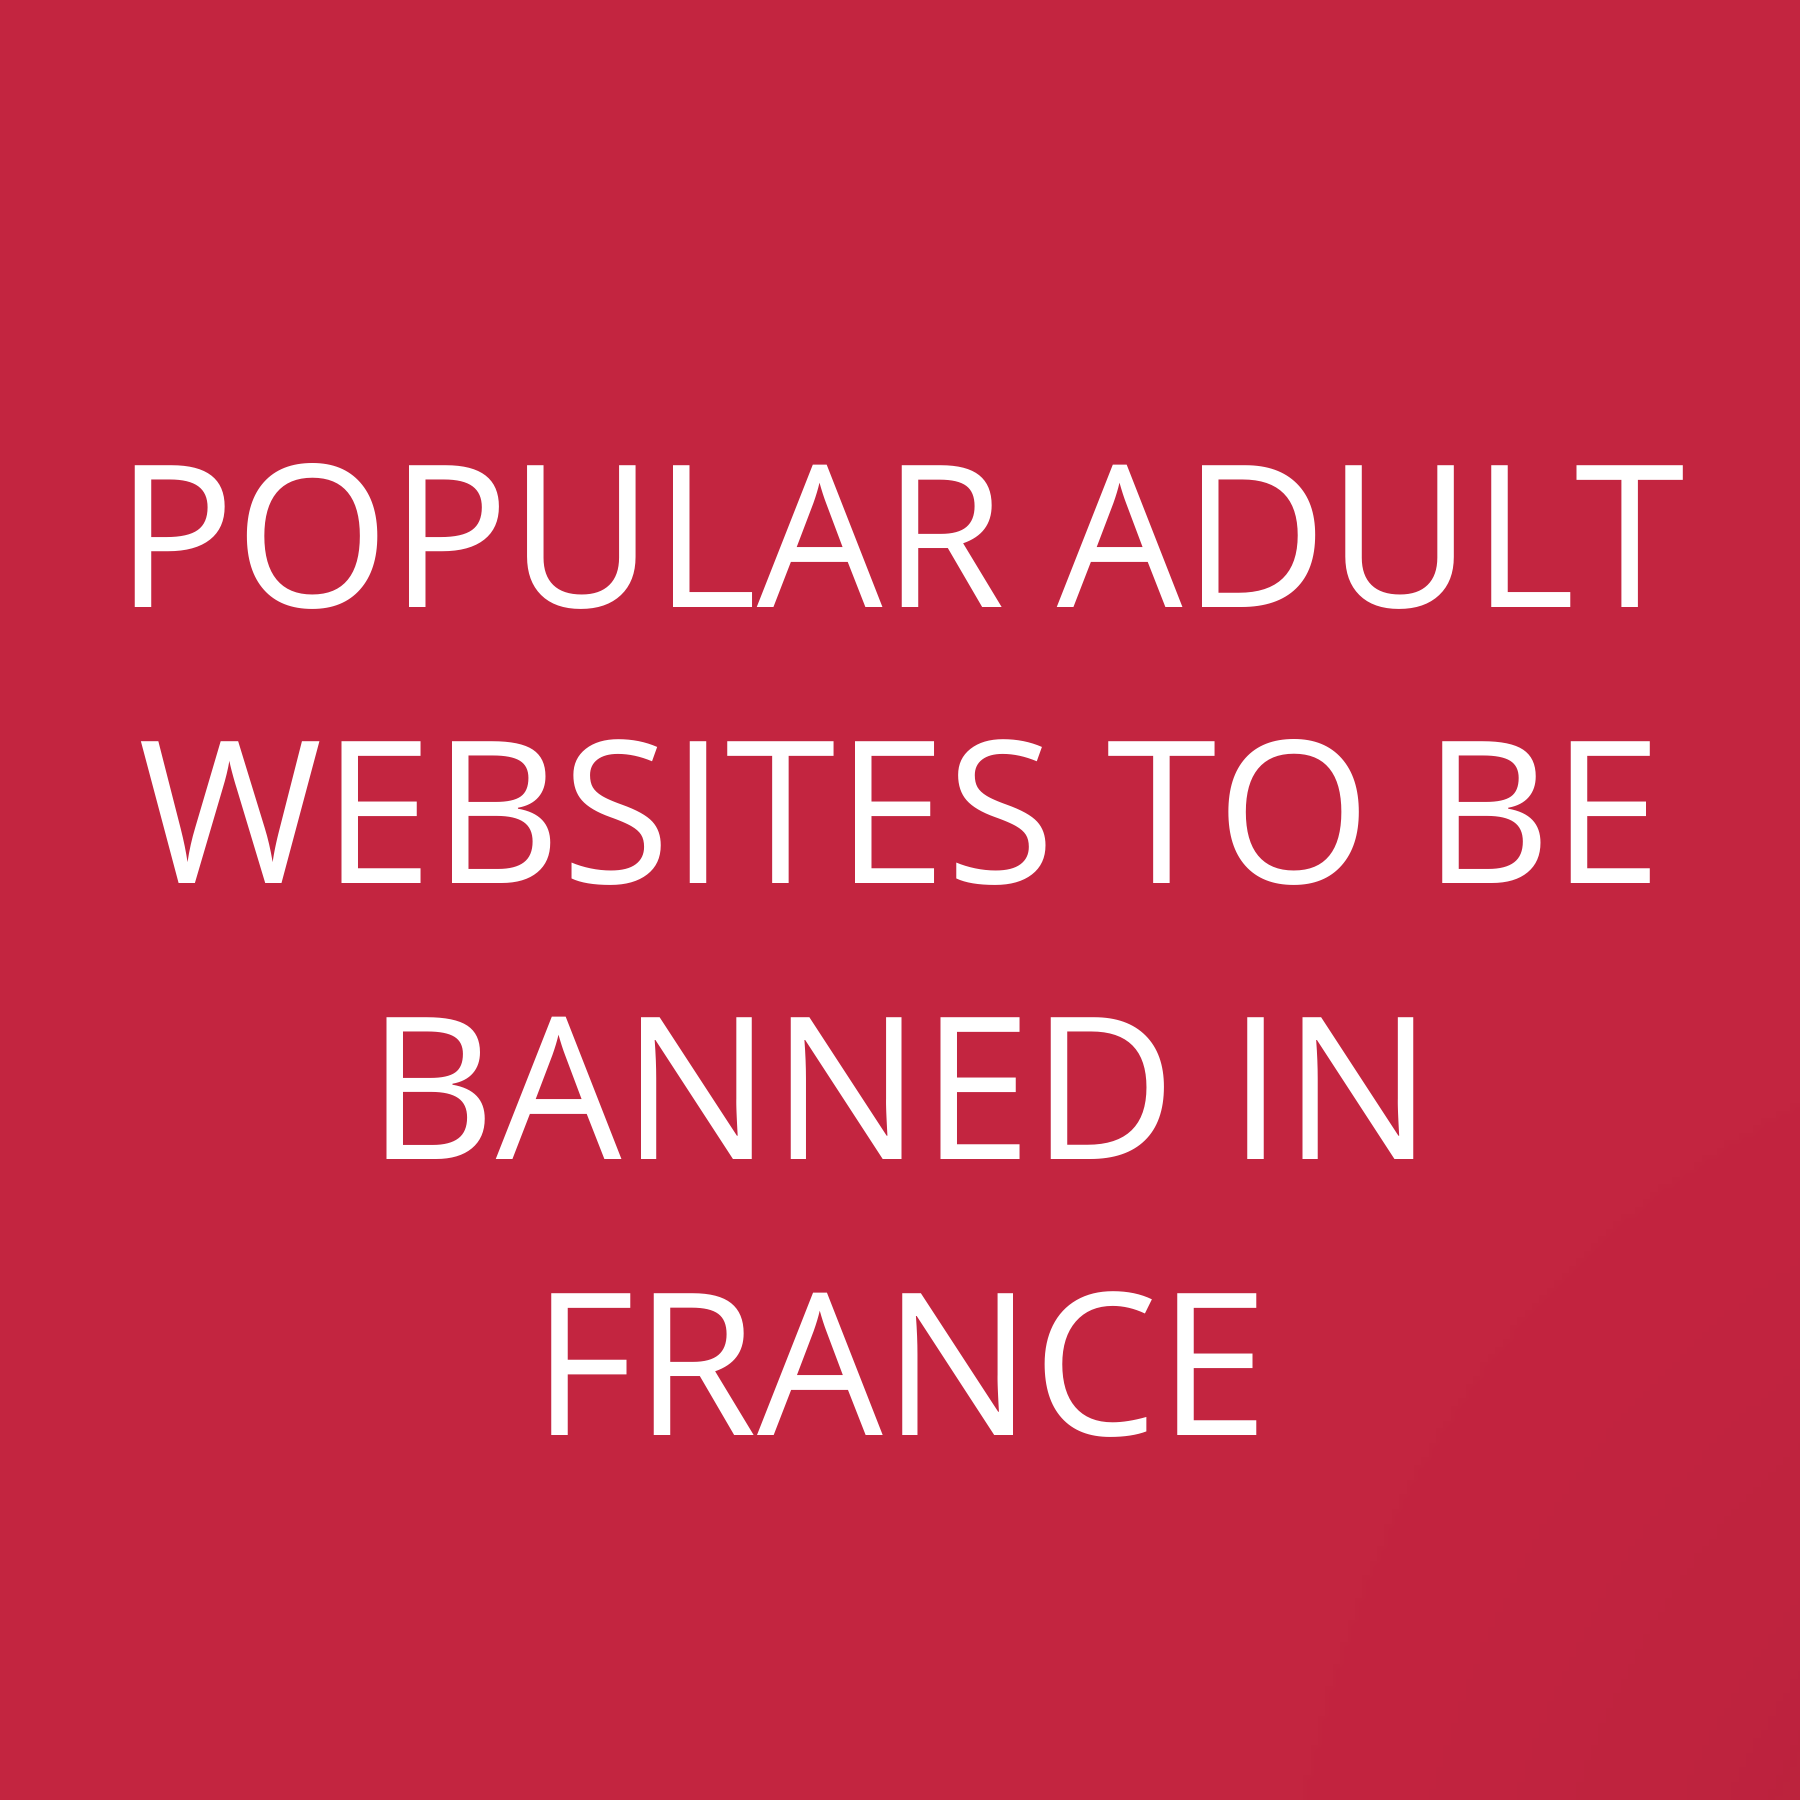 Popular adult websites to be banned in France